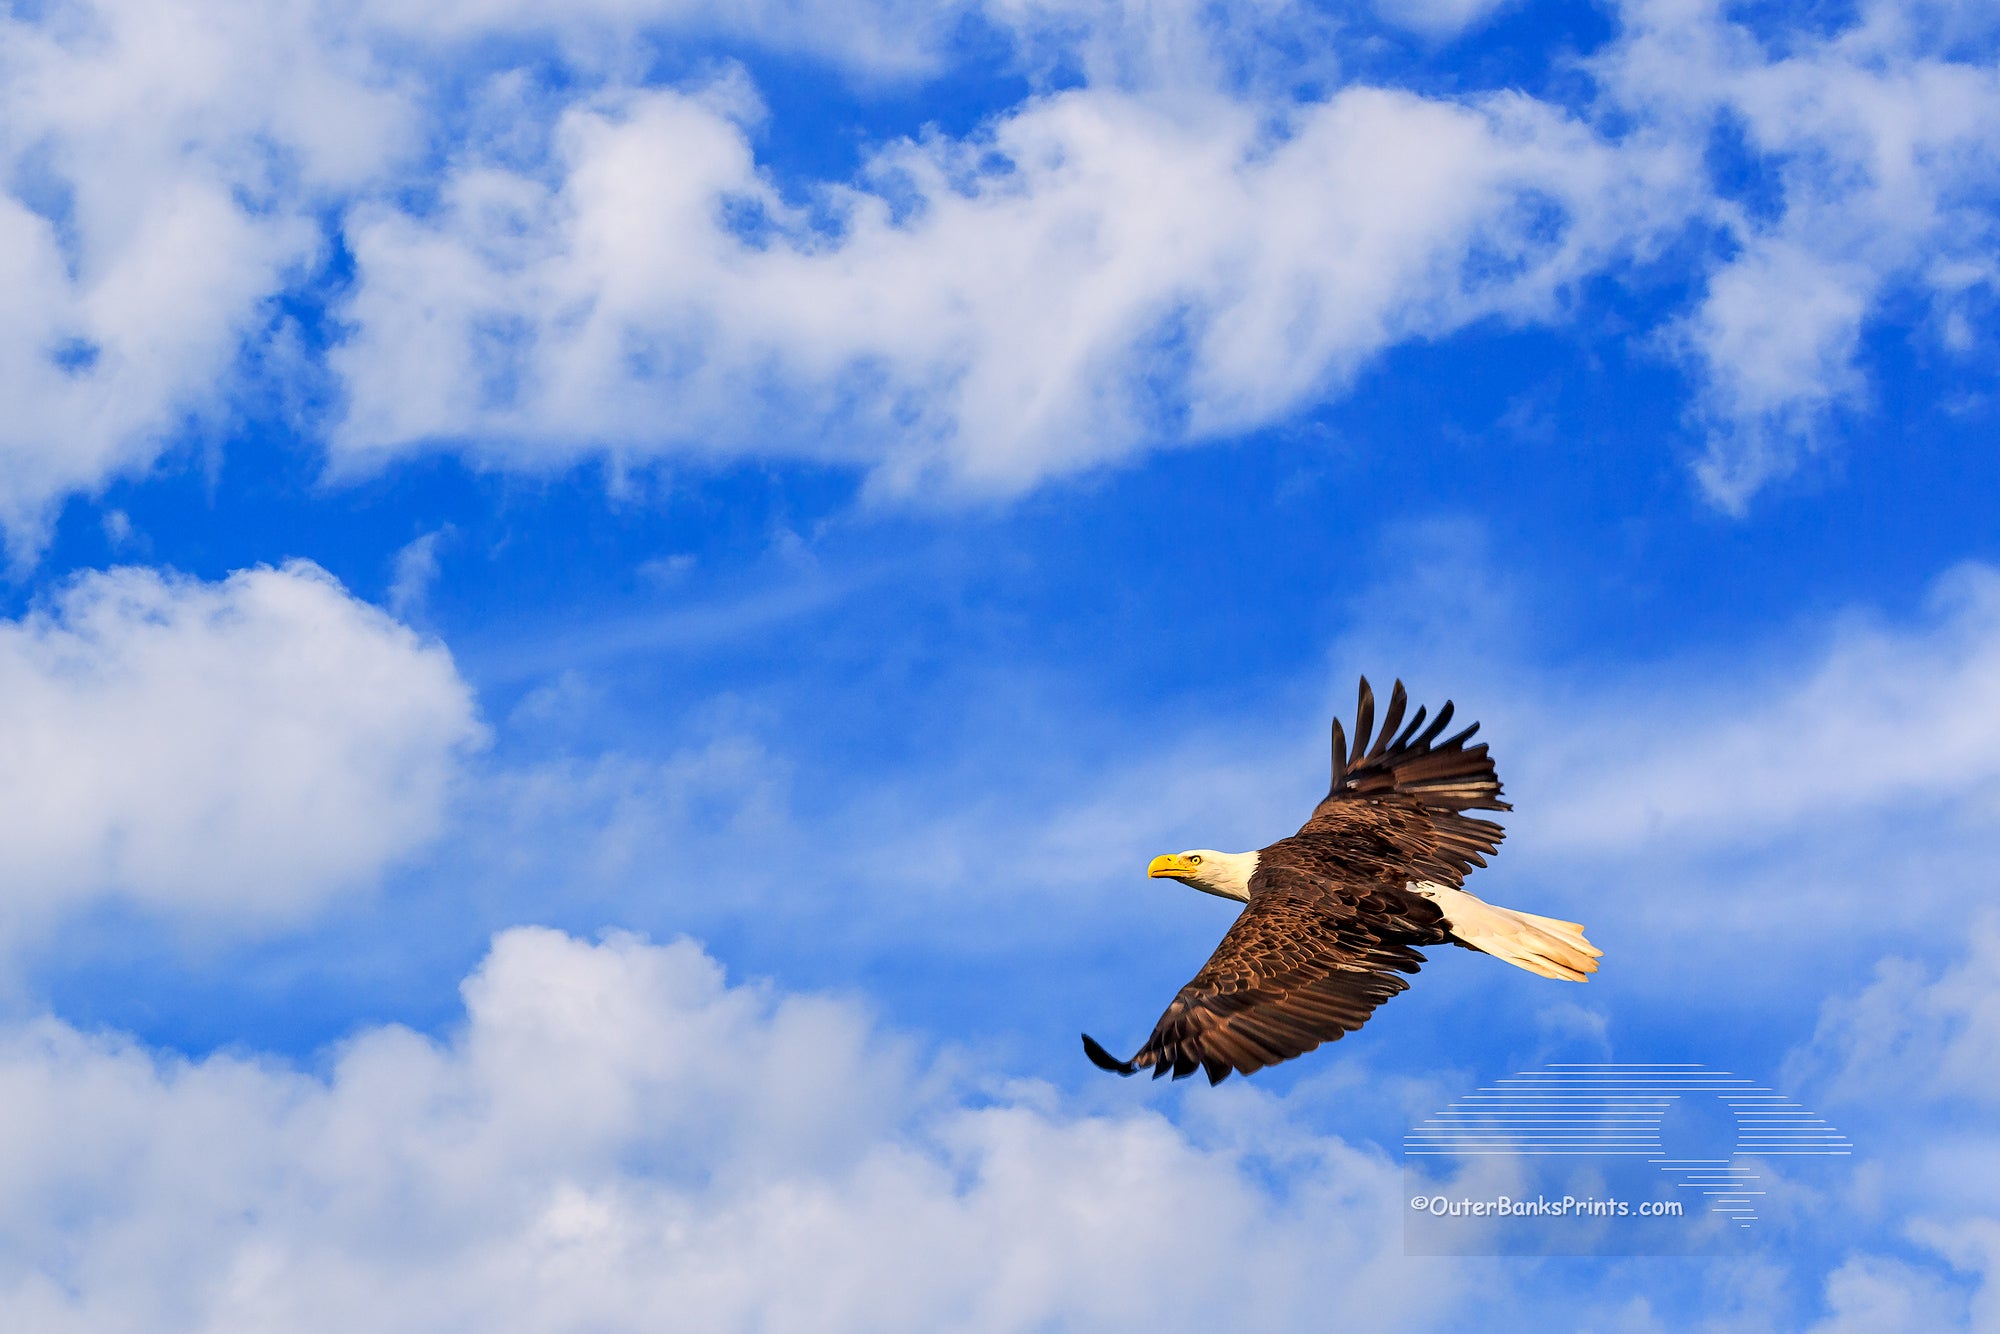 Inspirational photo of an eagle soaring.